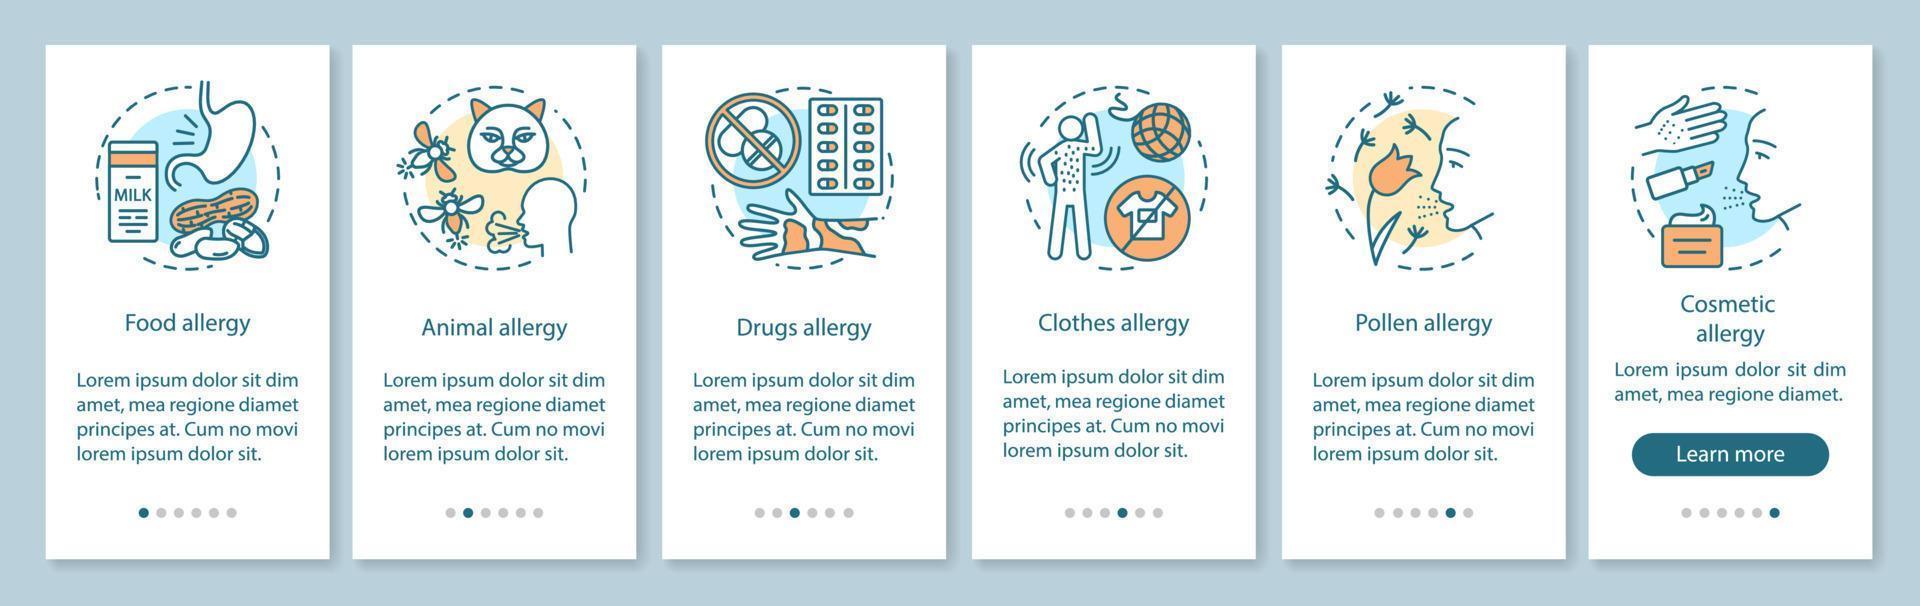 Allergy types onboarding mobile app page screen with linear concepts. Food, animal, clothes, pollen allergies walkthrough steps graphic instructions. UX, UI, GUI vector template with illustrations